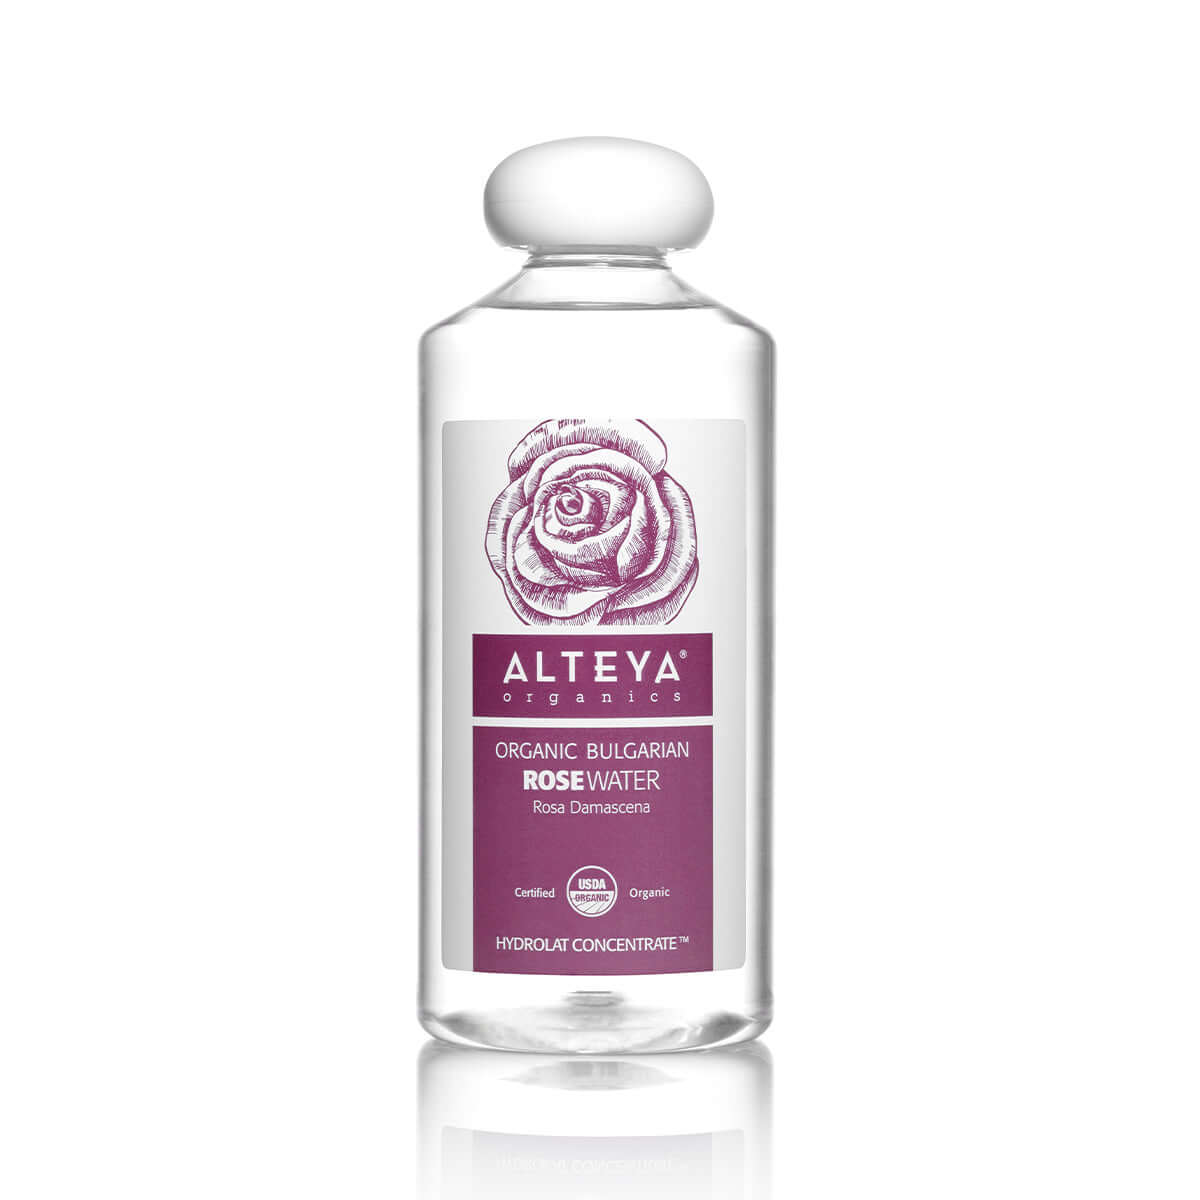 Our pure and Organic Rose Water helps tone, soften, and soothe skin, restoring its beauty and naturally fresh, youthful appearance. By delivering a healthy boost of hydration and essential micro-nutrients, it promotes dewy and more luminous complexion. Our Rose Water is known to refresh skin and support its moisture balance, smoothing out the appearance of fine lines and wrinkles for a more defined look. It can also be used to nourish and moisturize hair and prevent frizz.